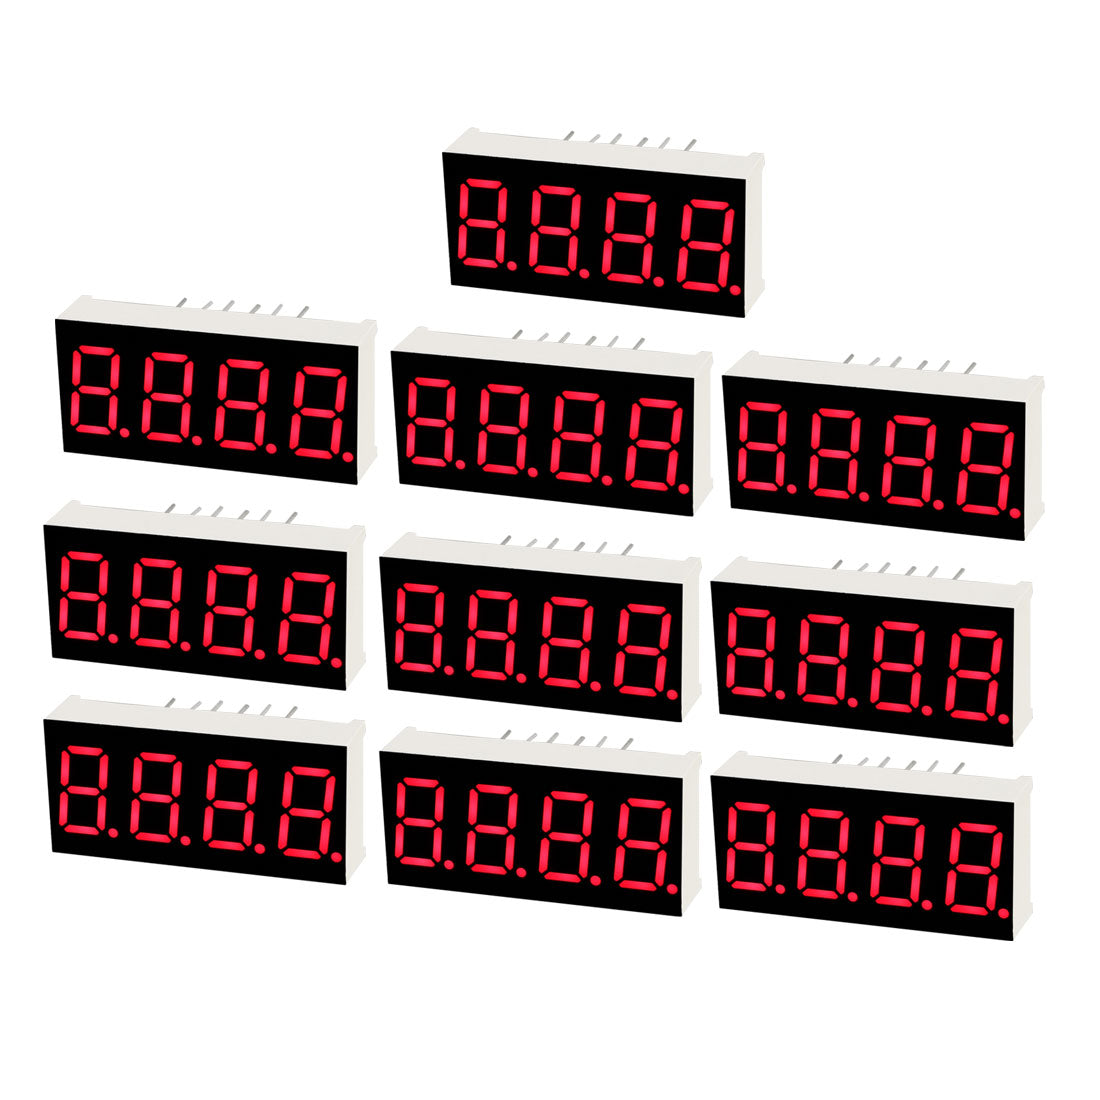 uxcell Uxcell Common Anode 12 Pin 4 Bit 7 Segment 1.18 x 0.55 x 0.28 Inch 0.35" Red LED Display Digital Tube 10pcs